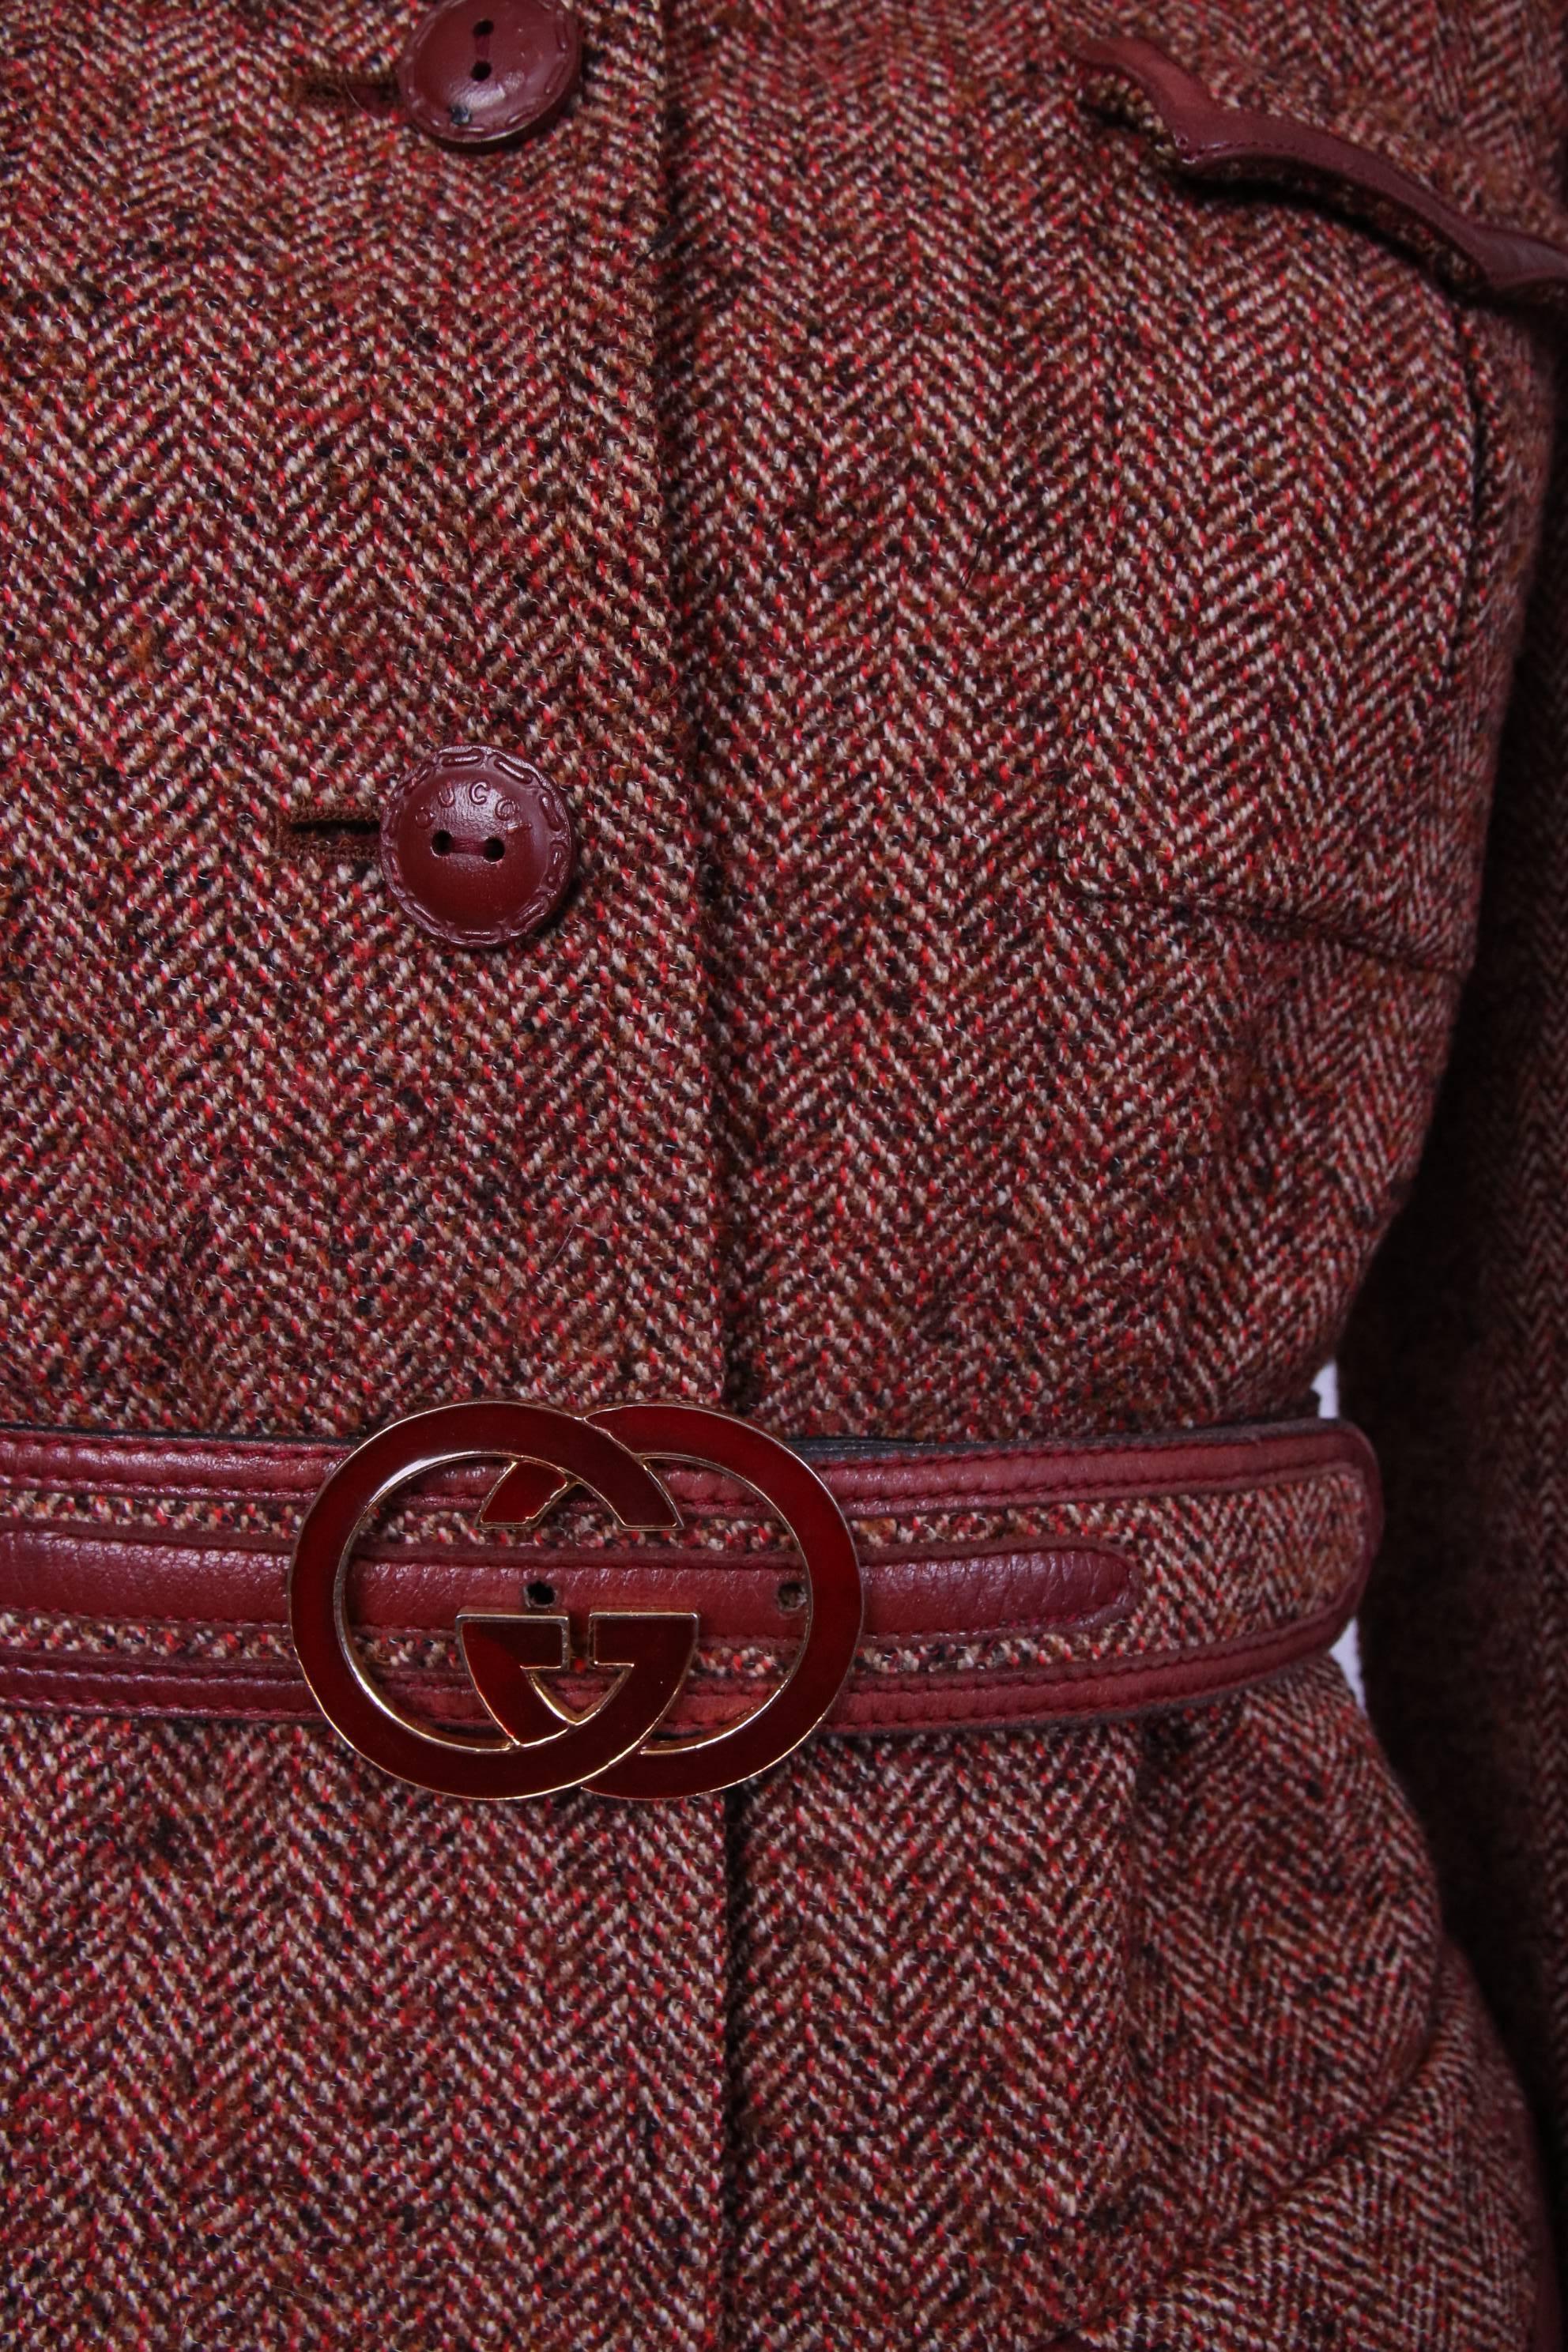 1970's Gucci tweed jacket with enameled burgundy color Gucci GG logo belt buckle, brown leather buttons and trim at pockets and sleeves. Entirely lined with at the interior with Gucci logo fabric. In excellent condition. Size 42. Please consult